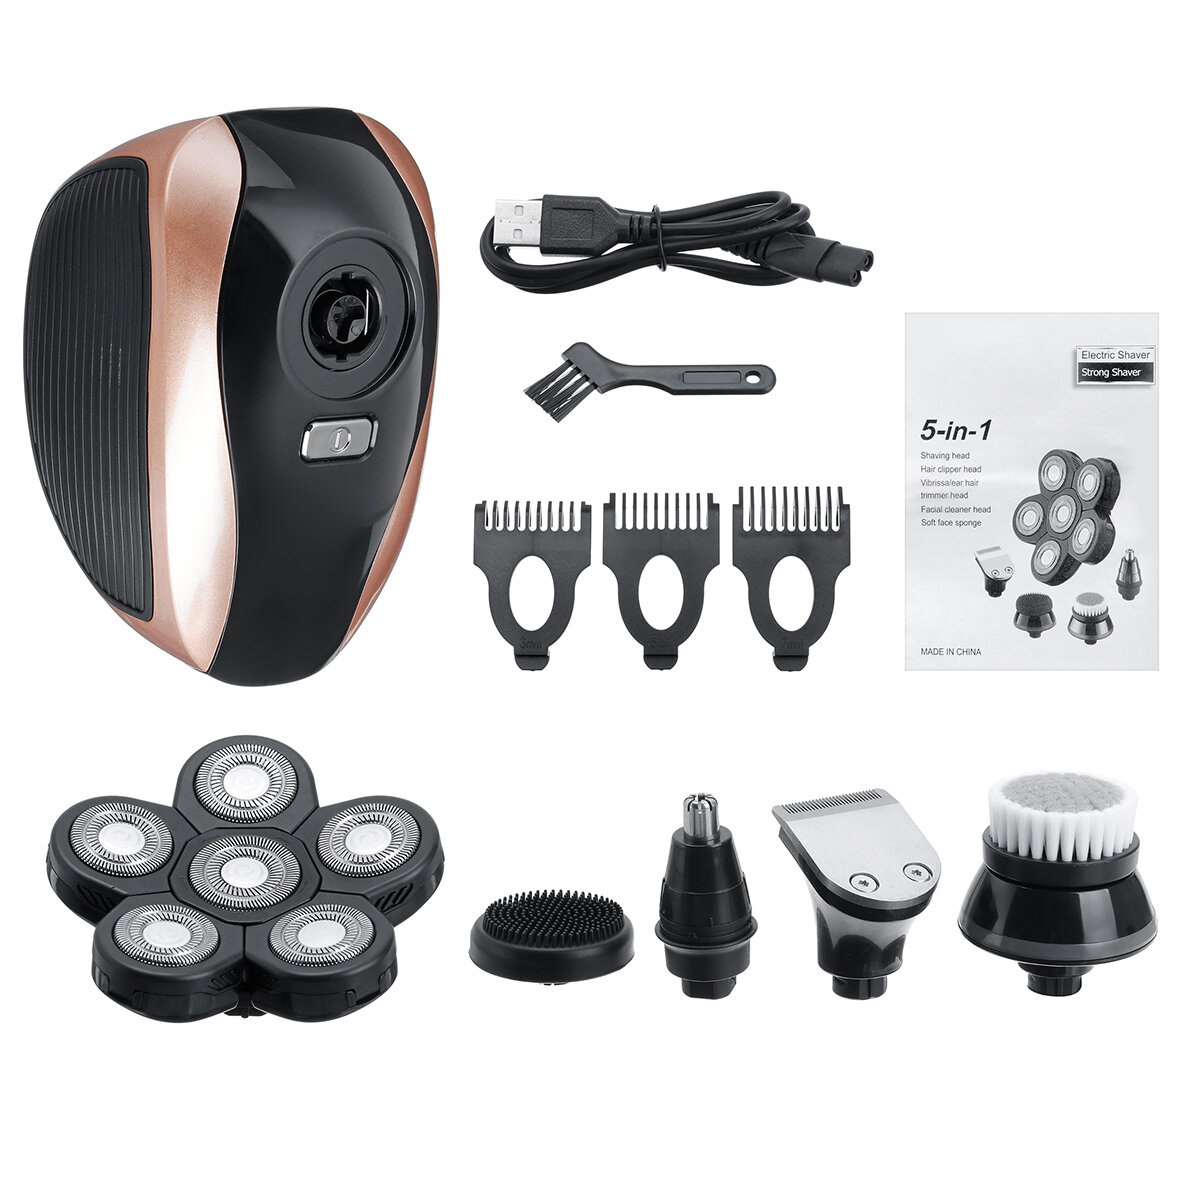 

5 in 1 USB Digital Display Rechargeable 6 Heads Bald Head Shaver Hair Trimmer Clipper